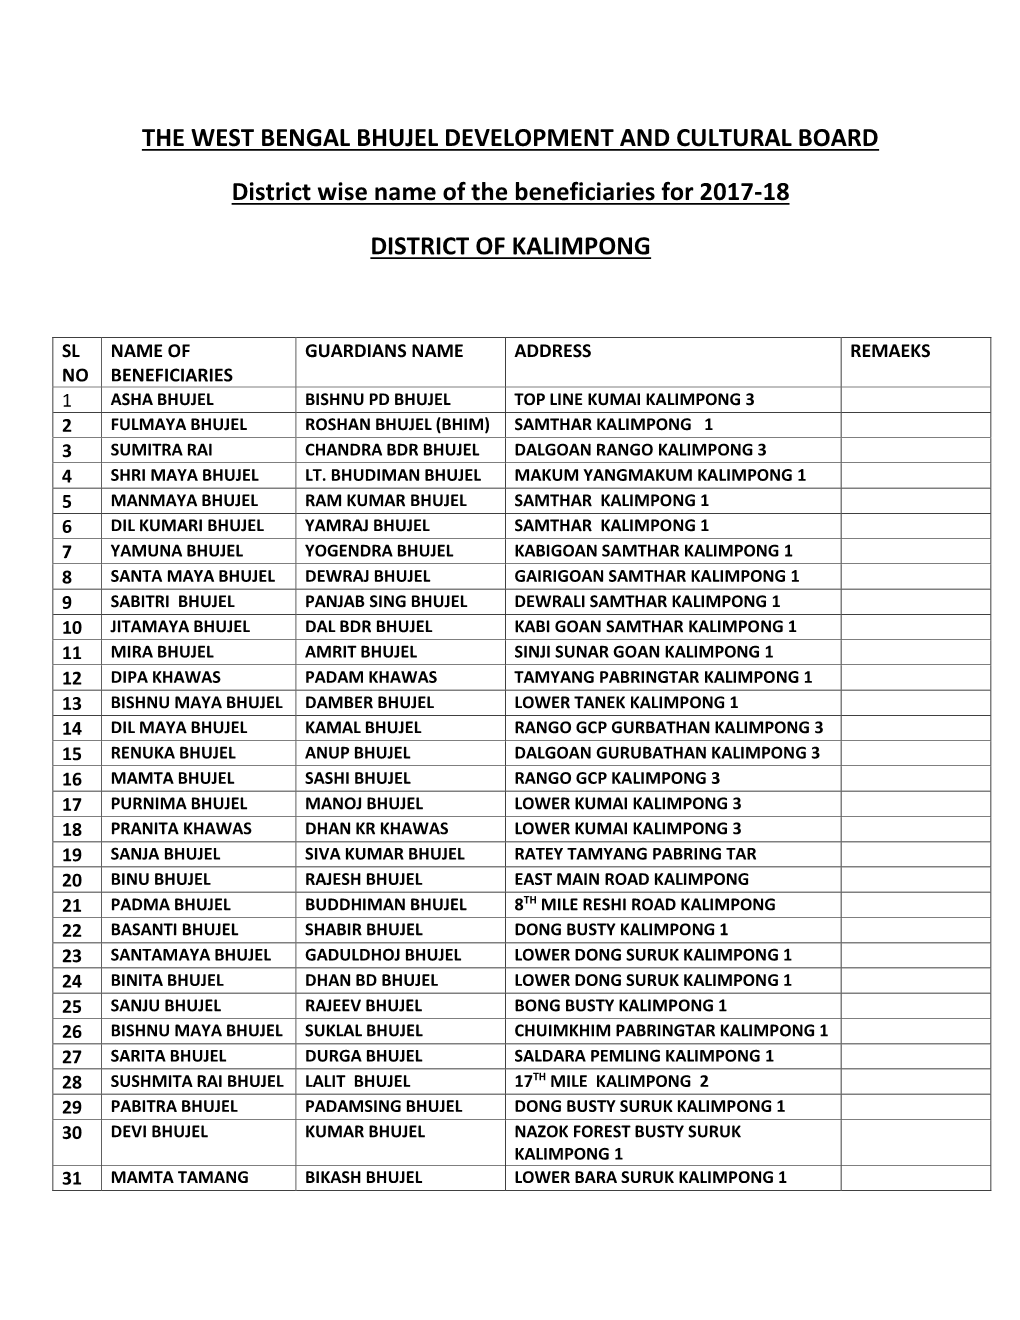 District Wise Name of the Beneficiaries for 2017-18